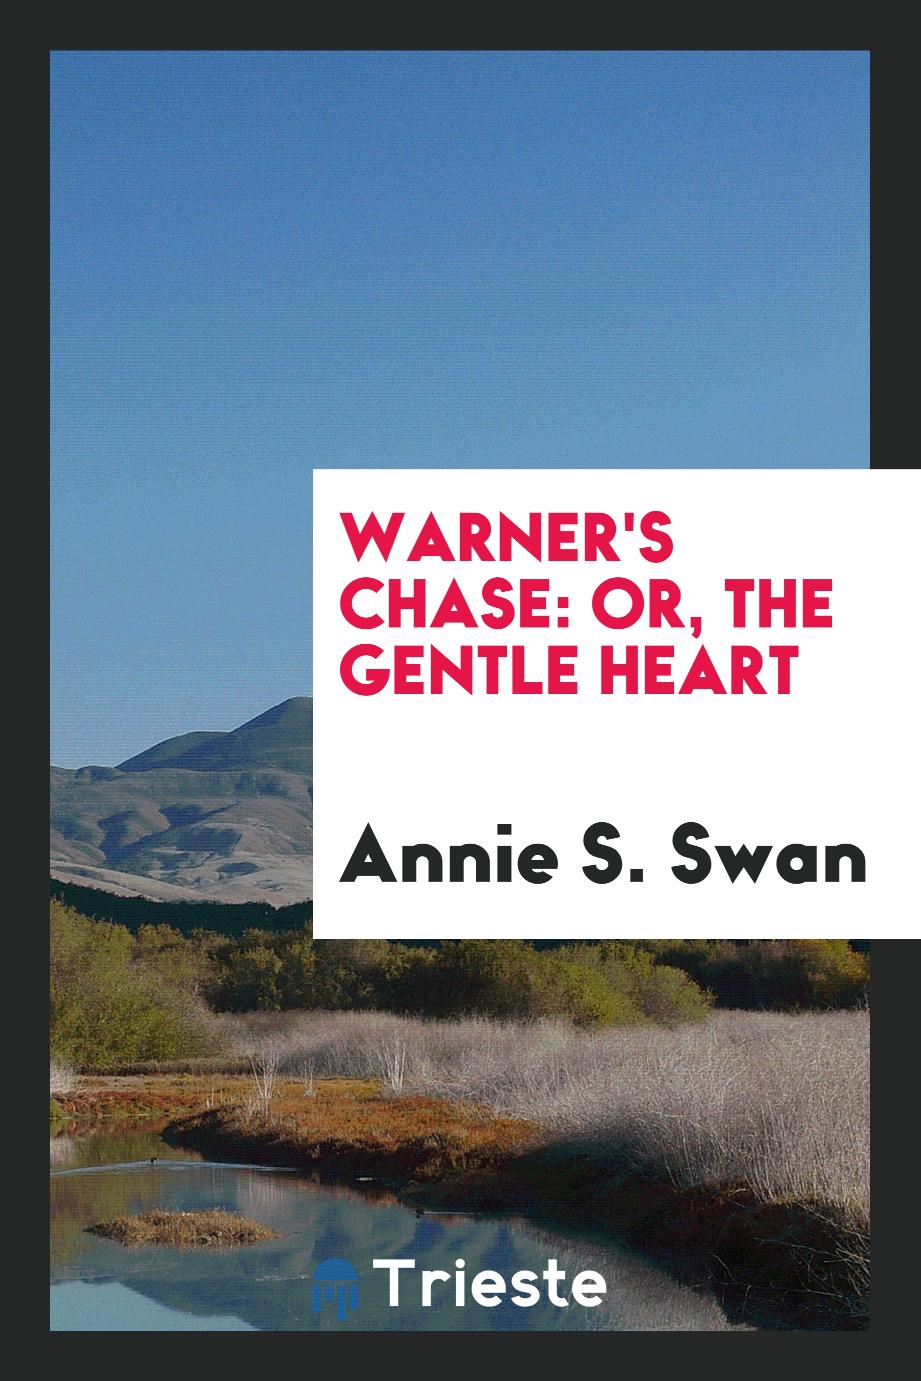 Warner's chase: or, The gentle heart